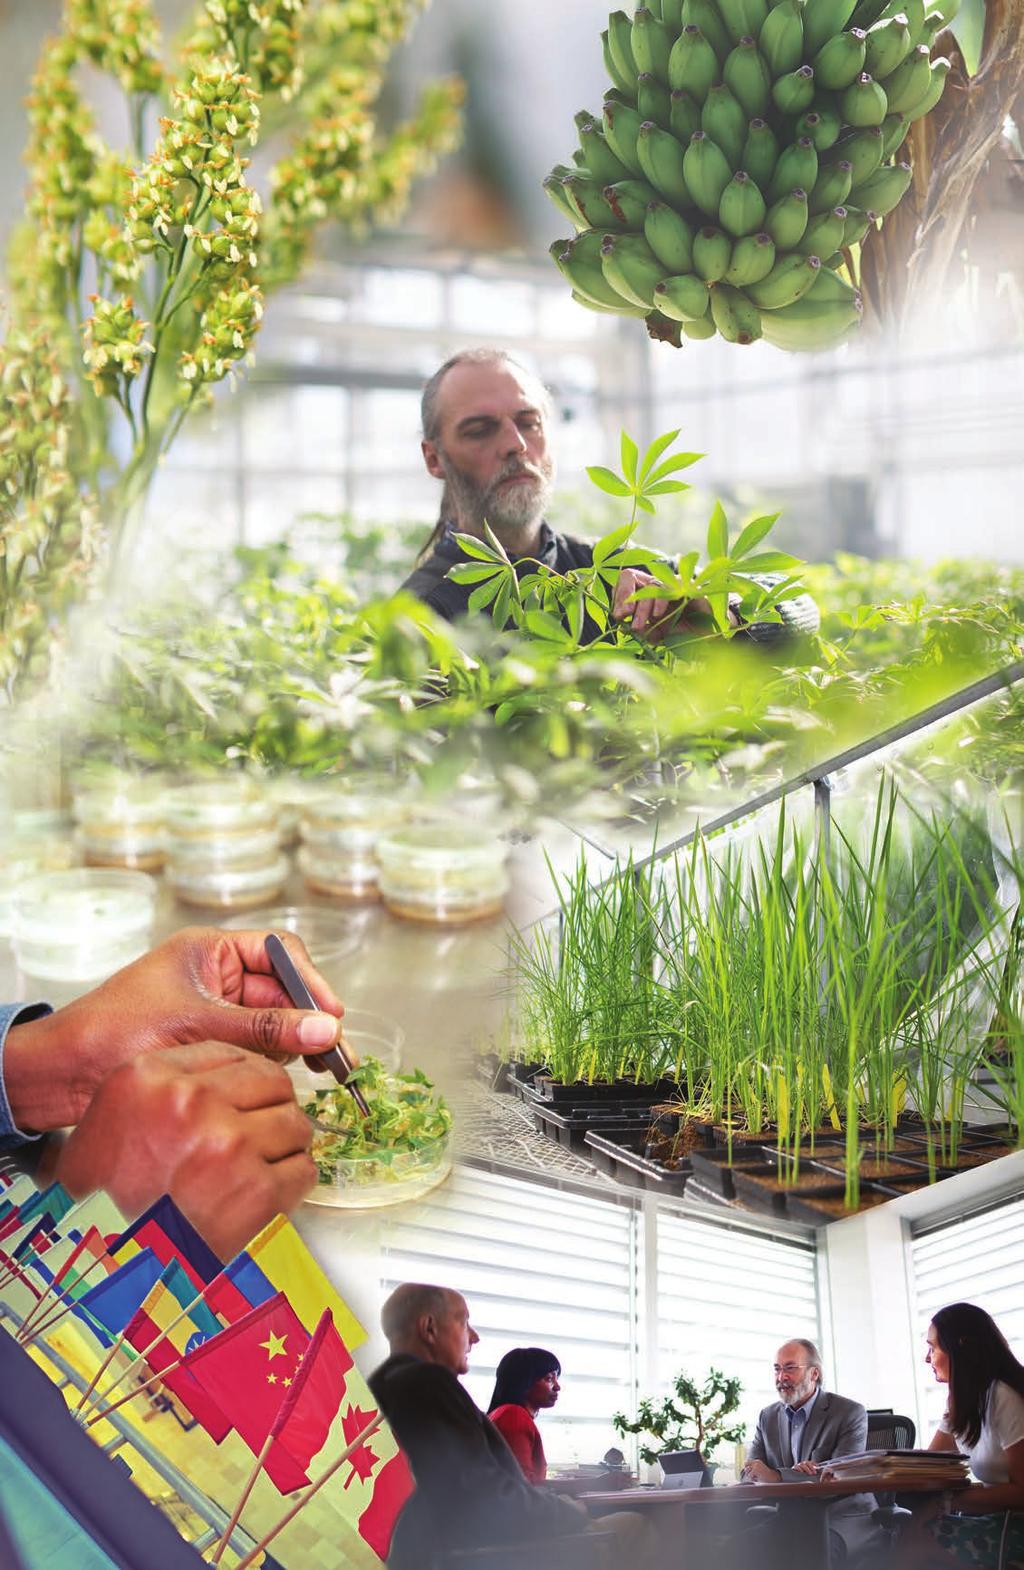 SCIENTISTS MADE 100 CANDIDATE PLANT VARIETIES TO